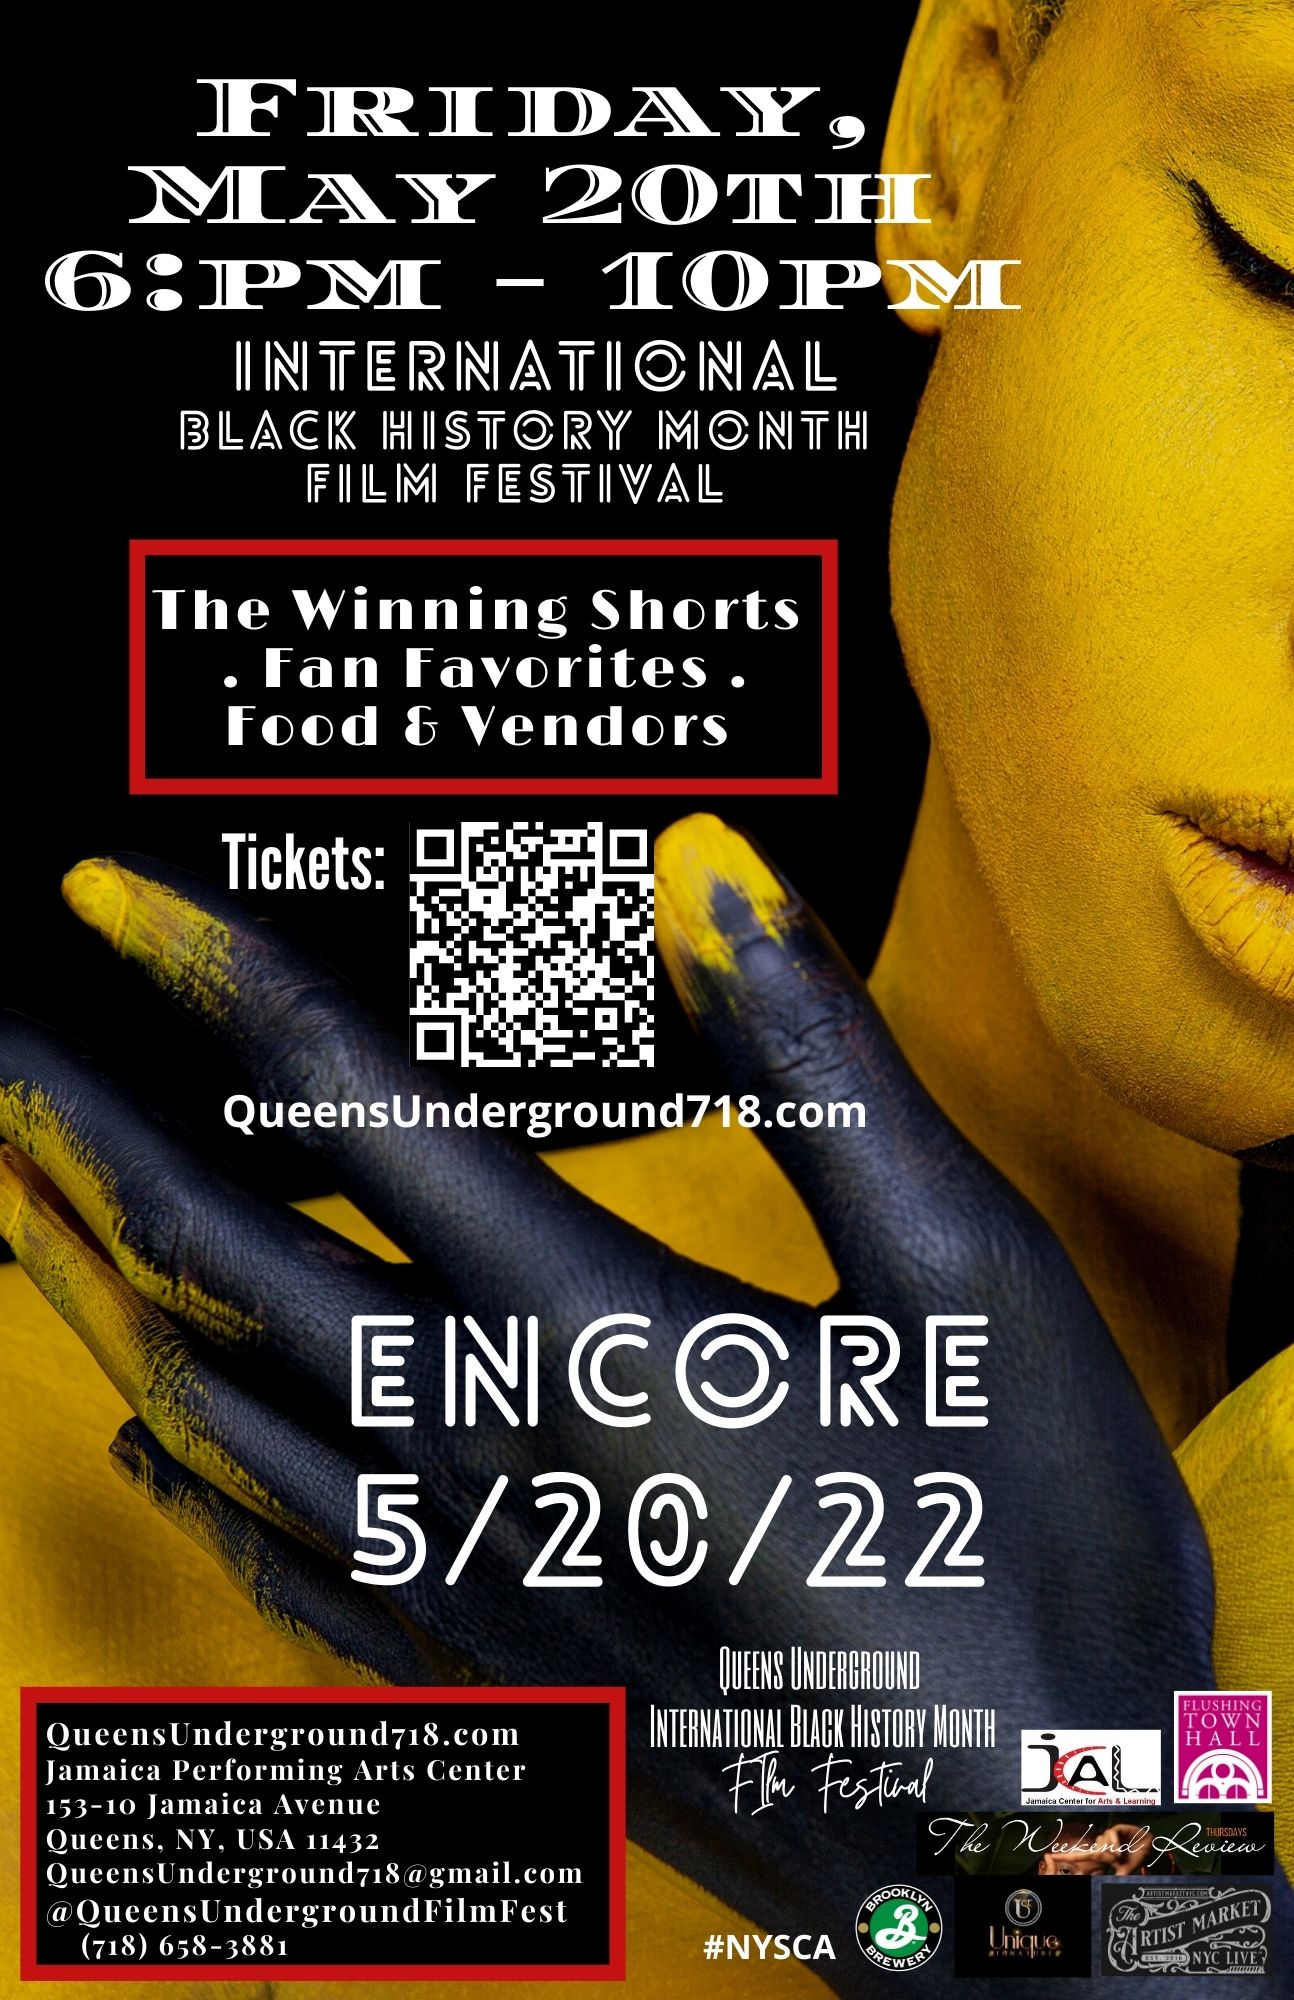 Encore Film Festival In May @ The Jamaica Performing Arts Center